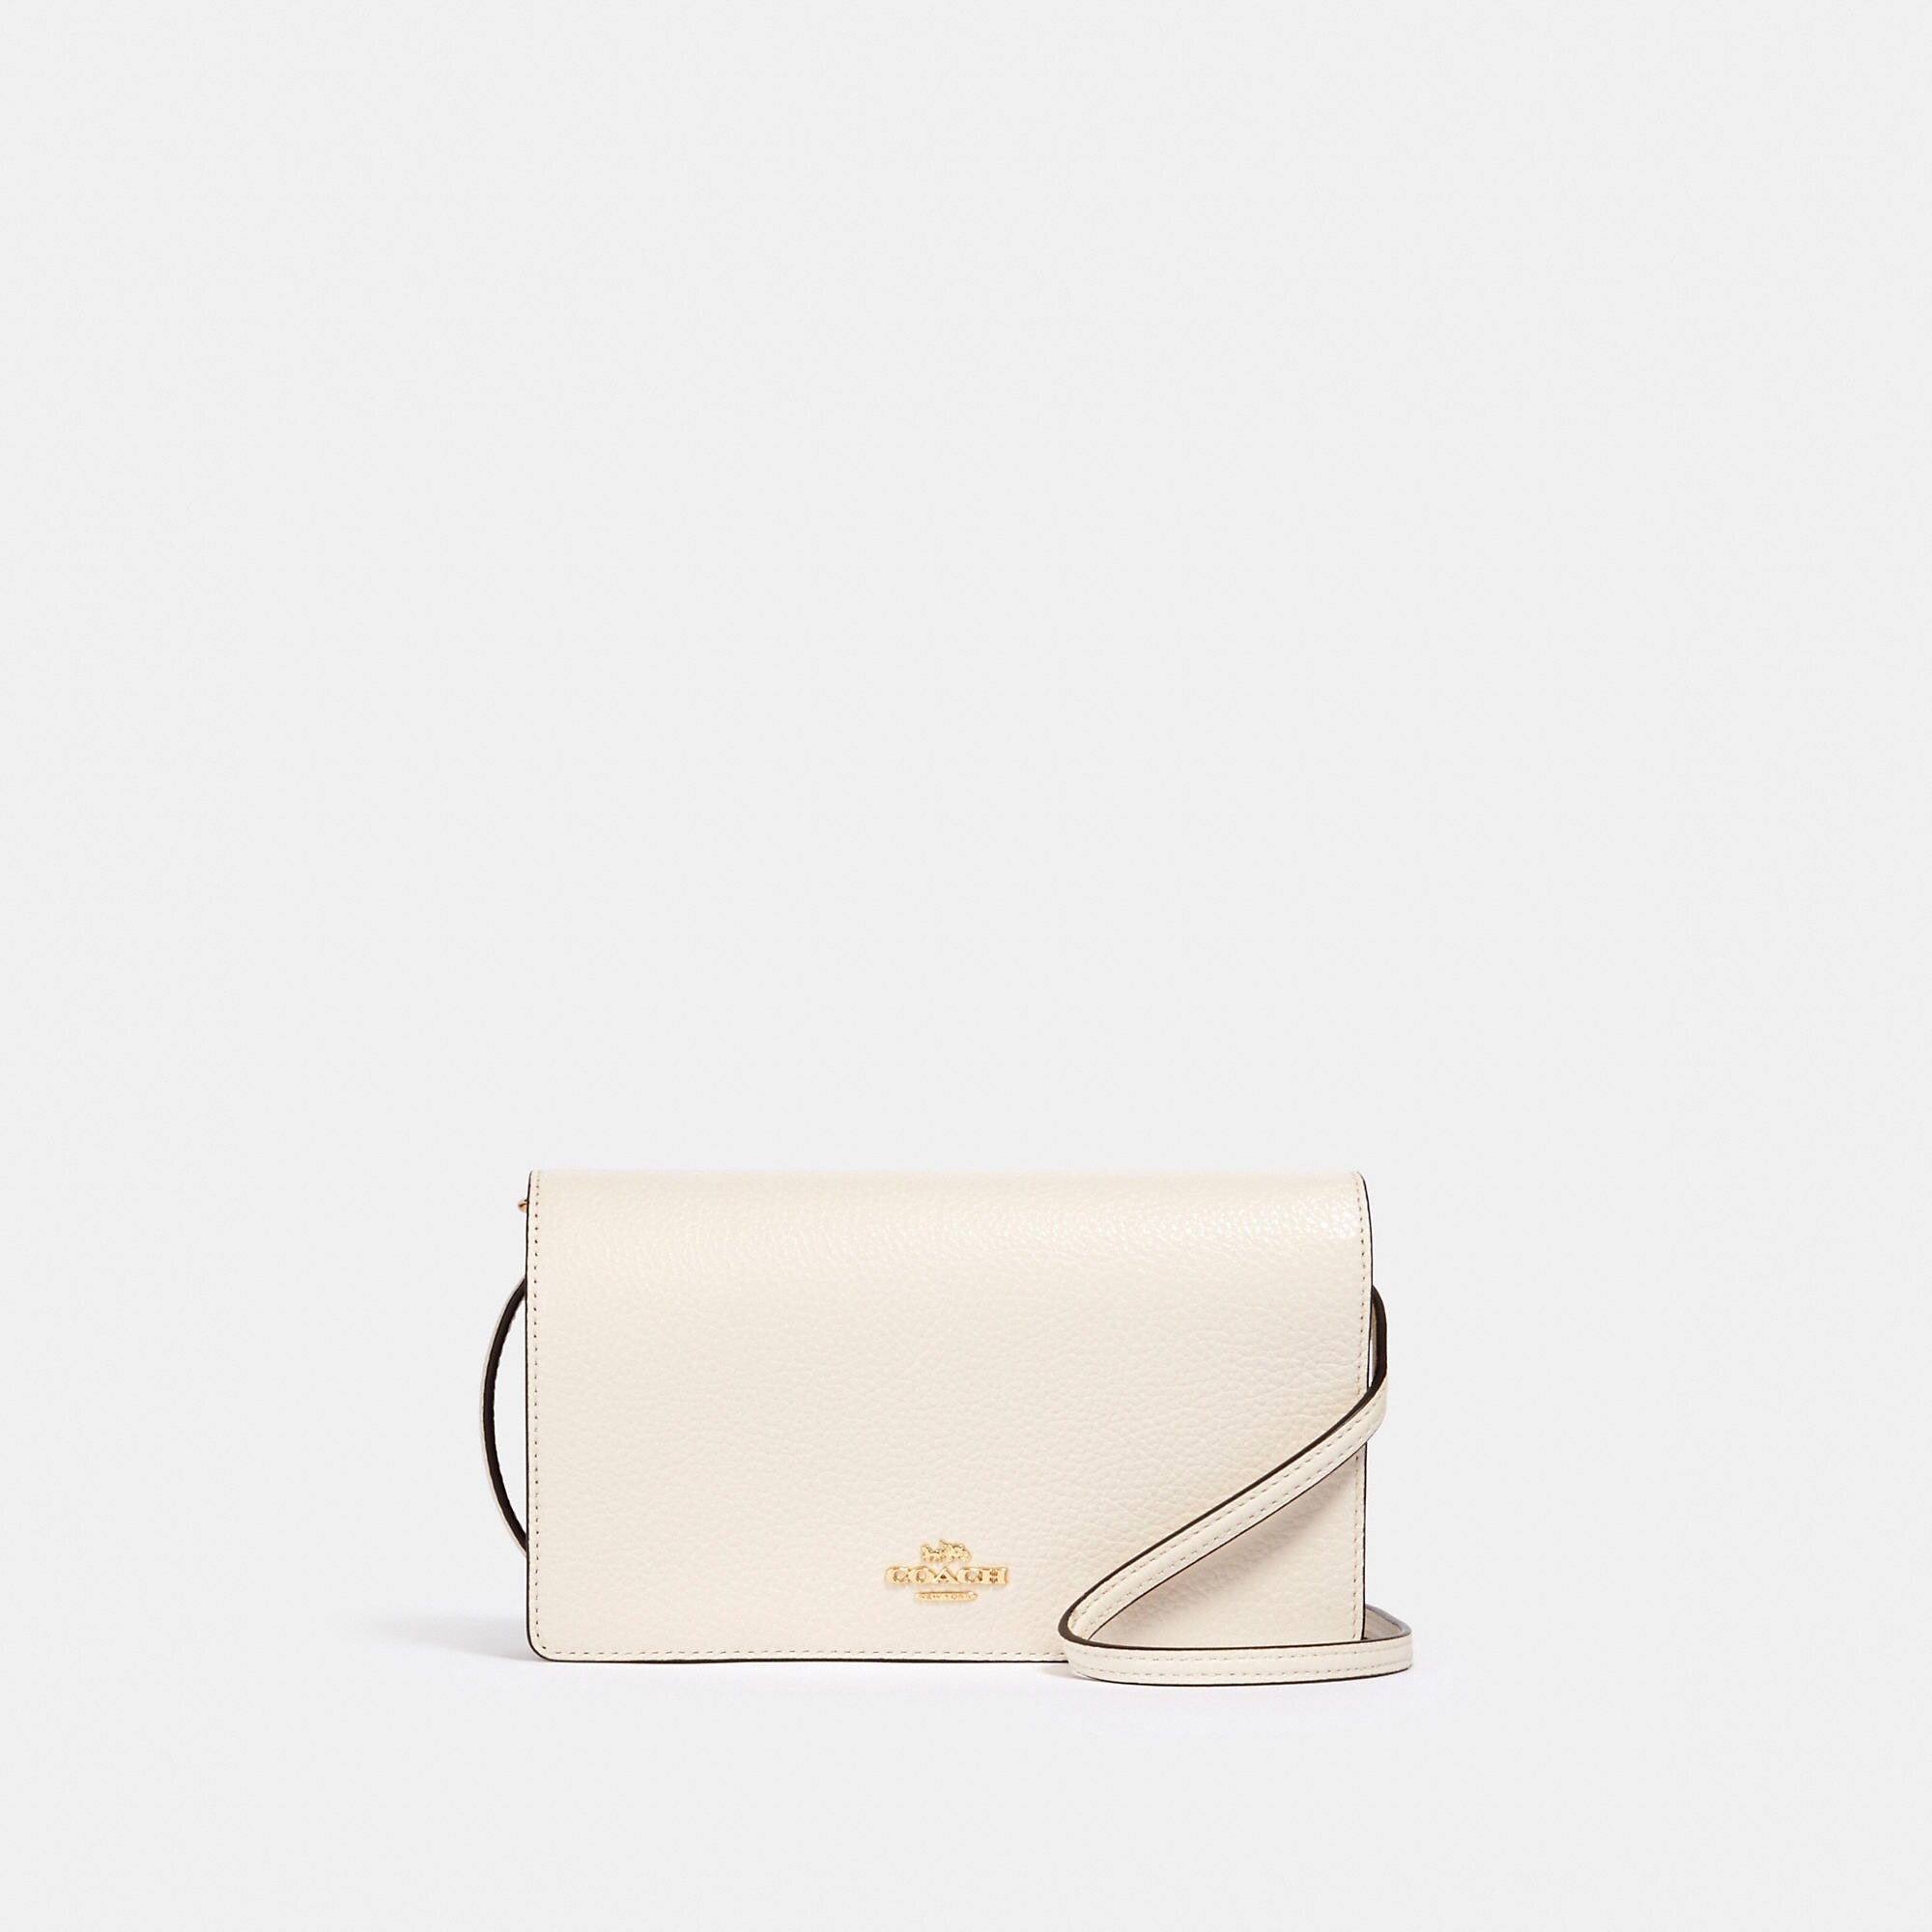 Coach Outlet Anna Foldover Crossbody Clutch - TJ Outlet